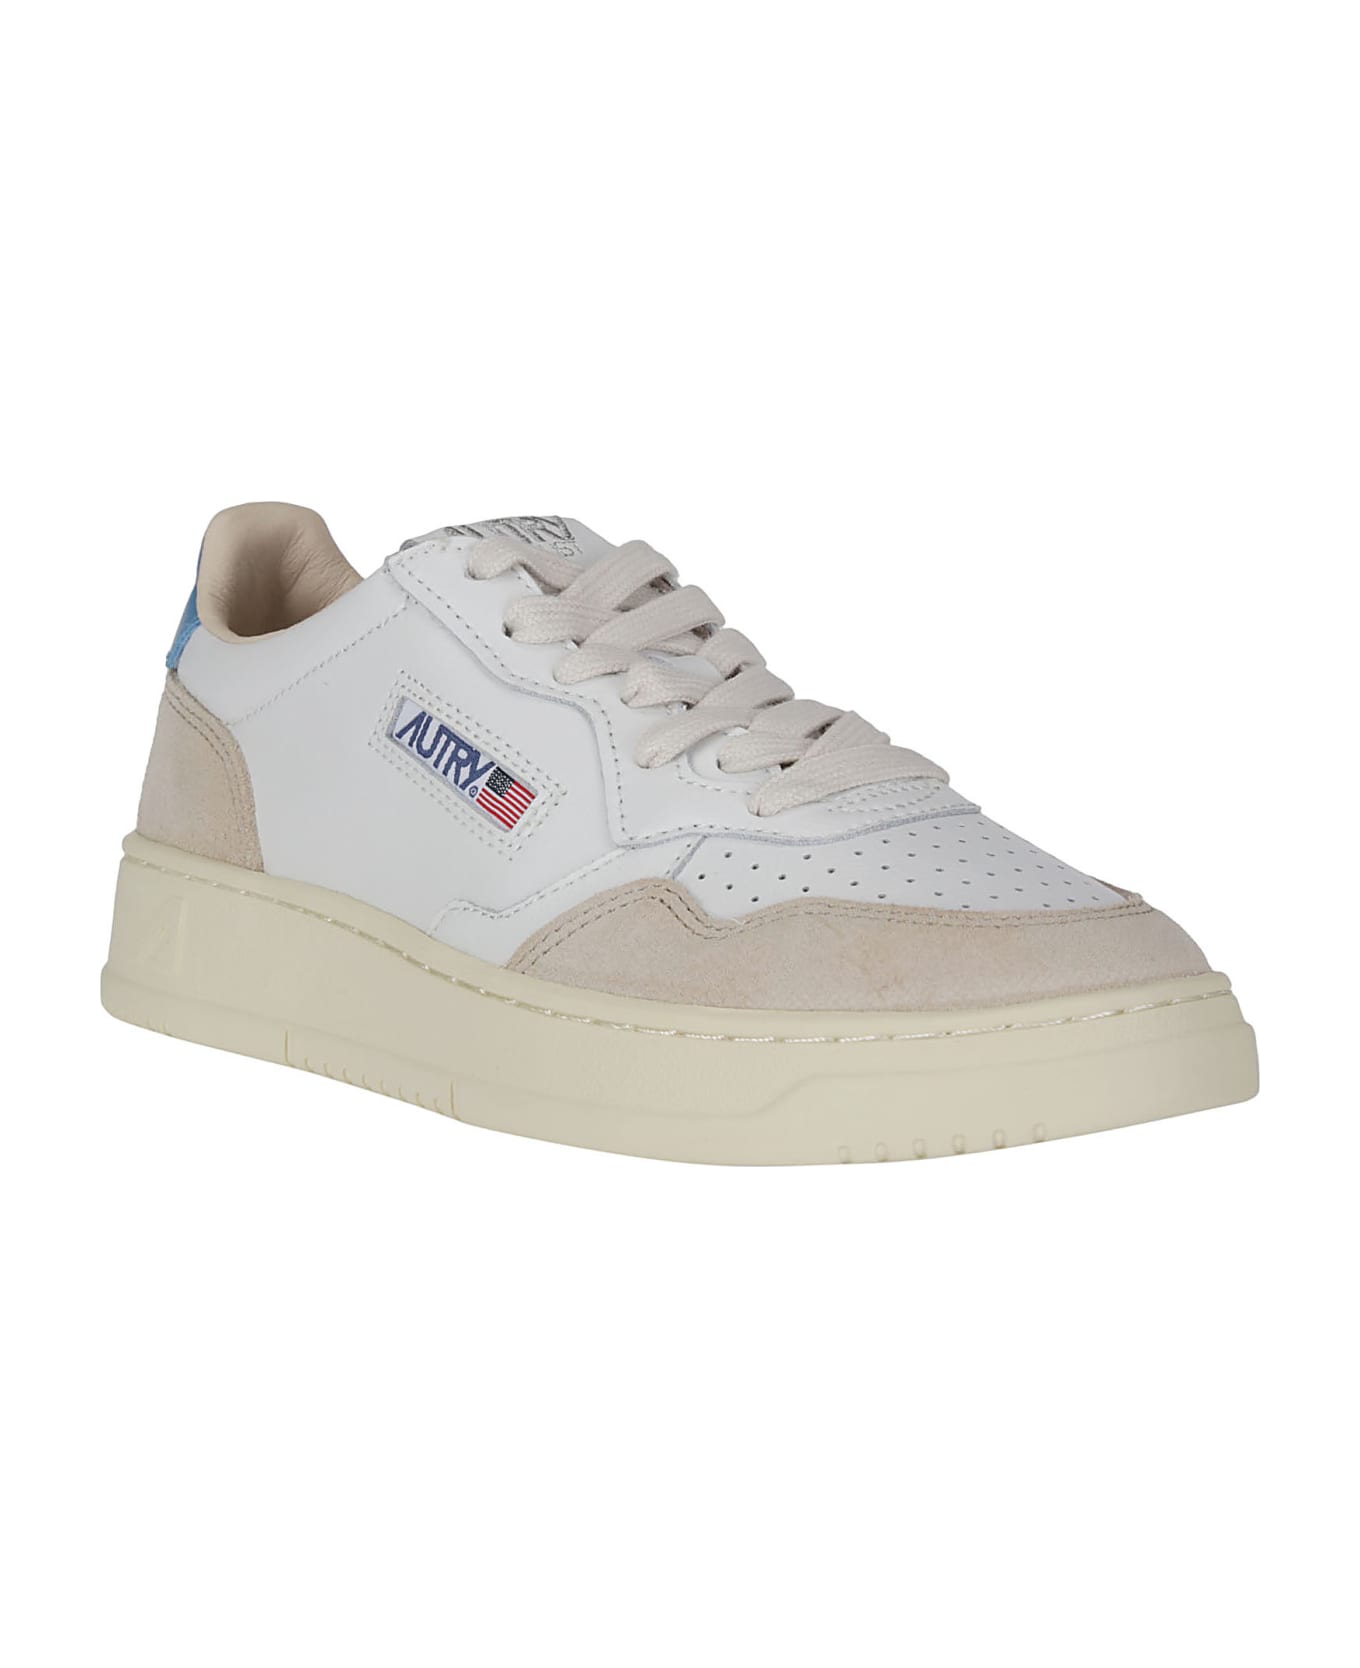 Autry Medalist Low Sneakers - WHTNIAGARA